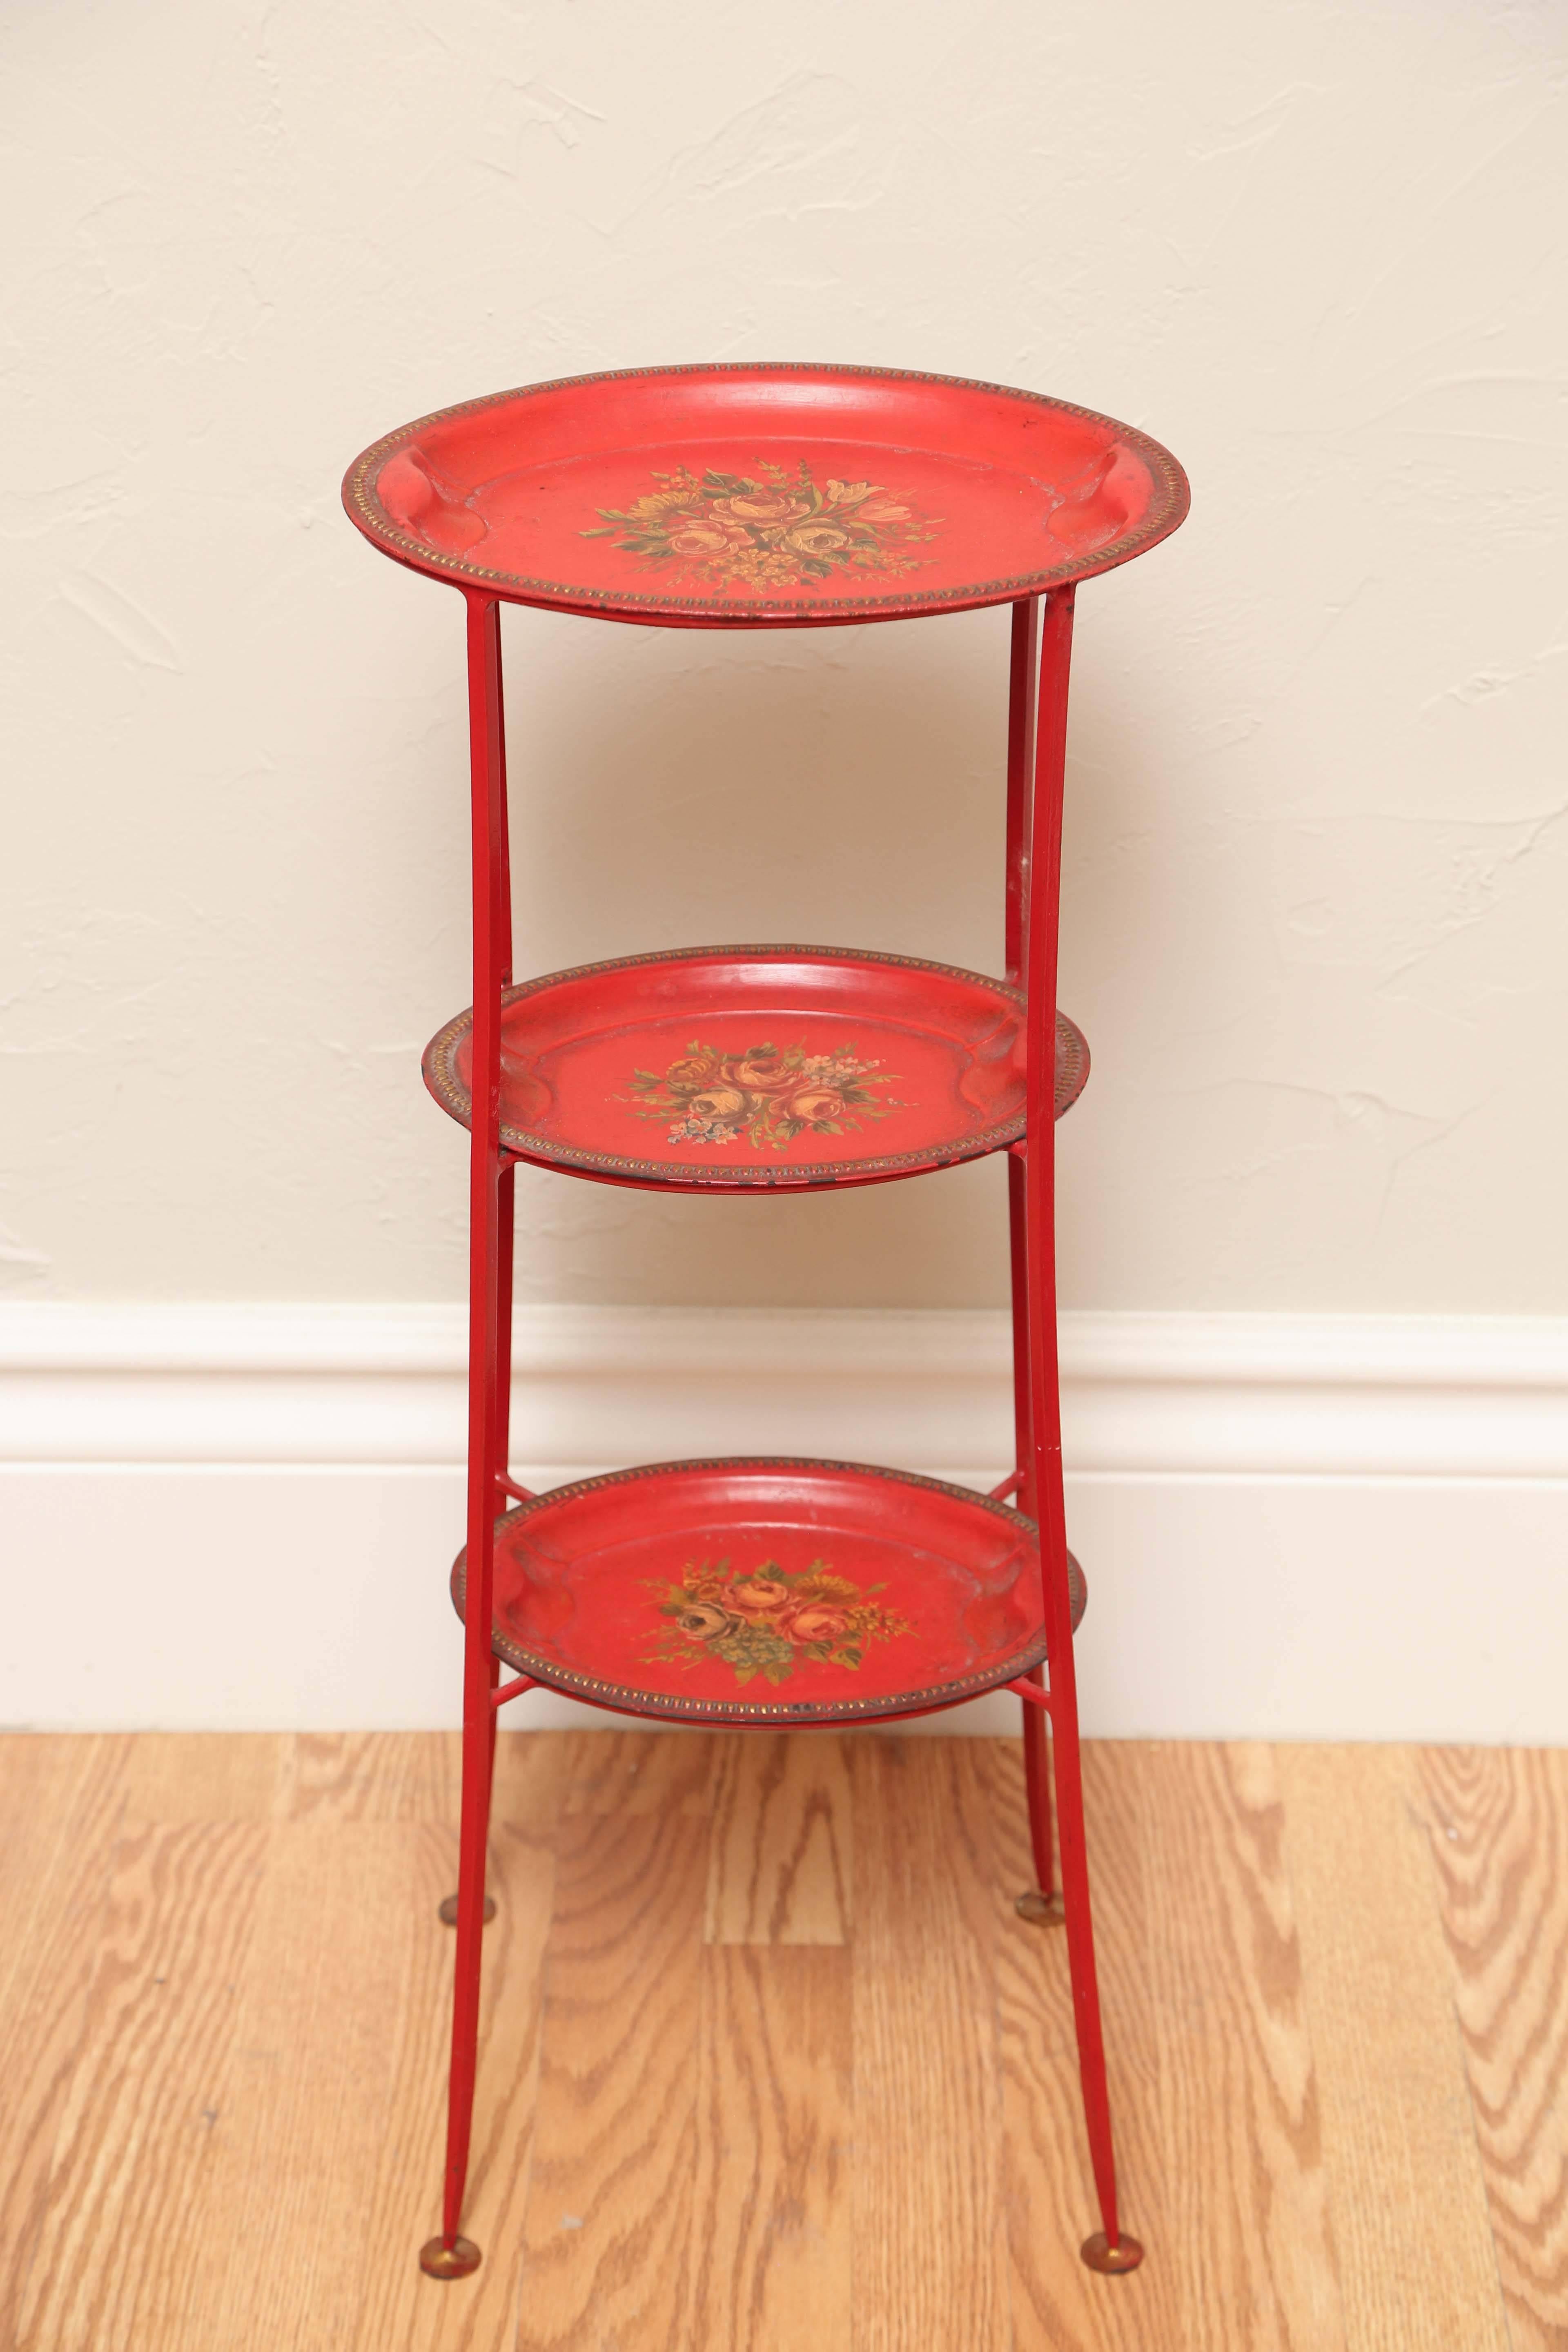 Charming three-tier tole stand with removable trays. Perfect for high tea.